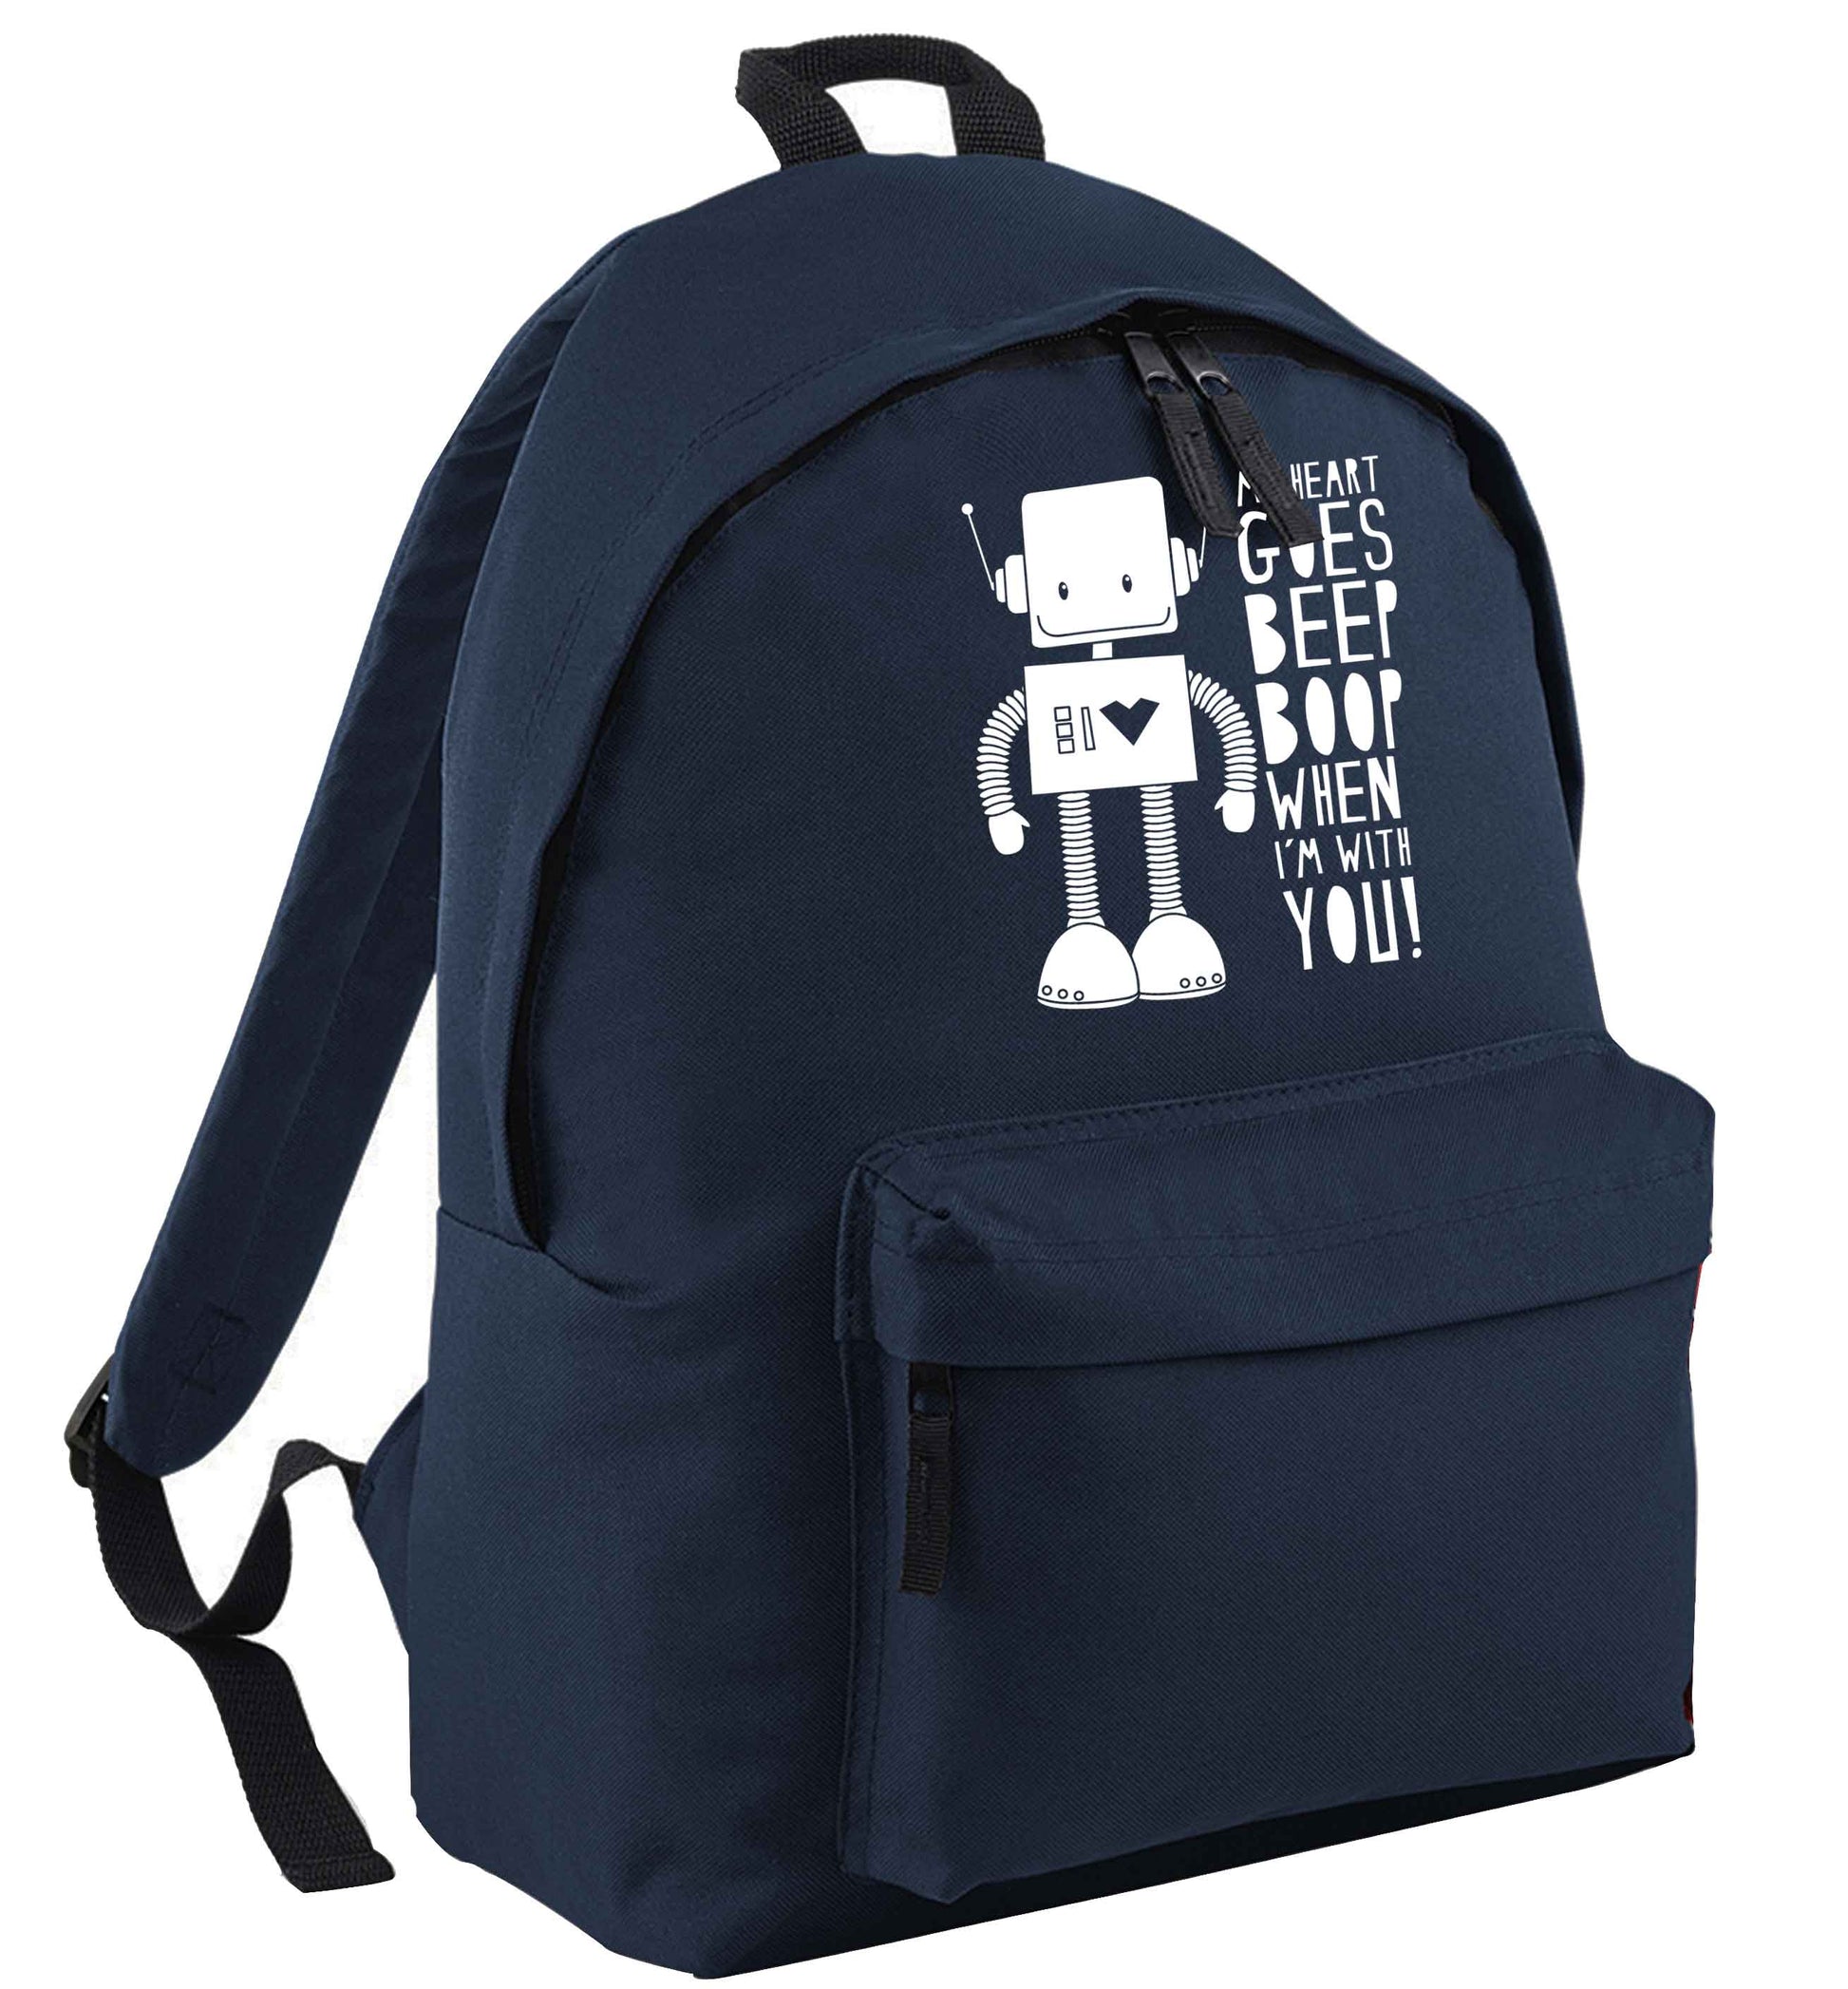 My heart goes beep boop when I'm with you navy adults backpack